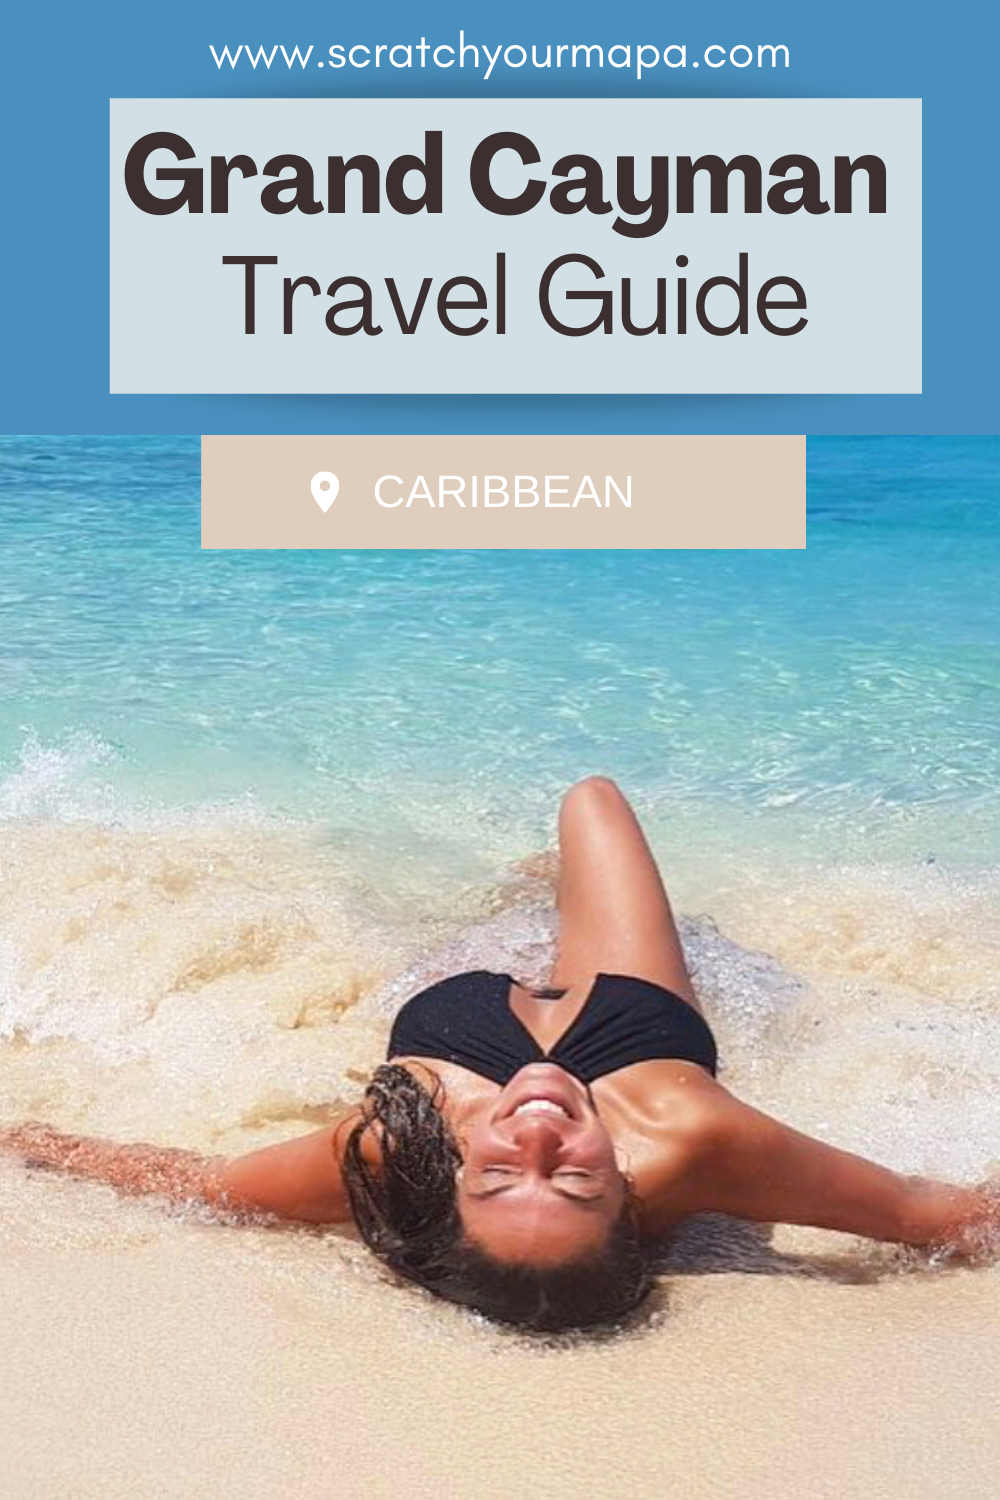 Things to do in Grand Cayman